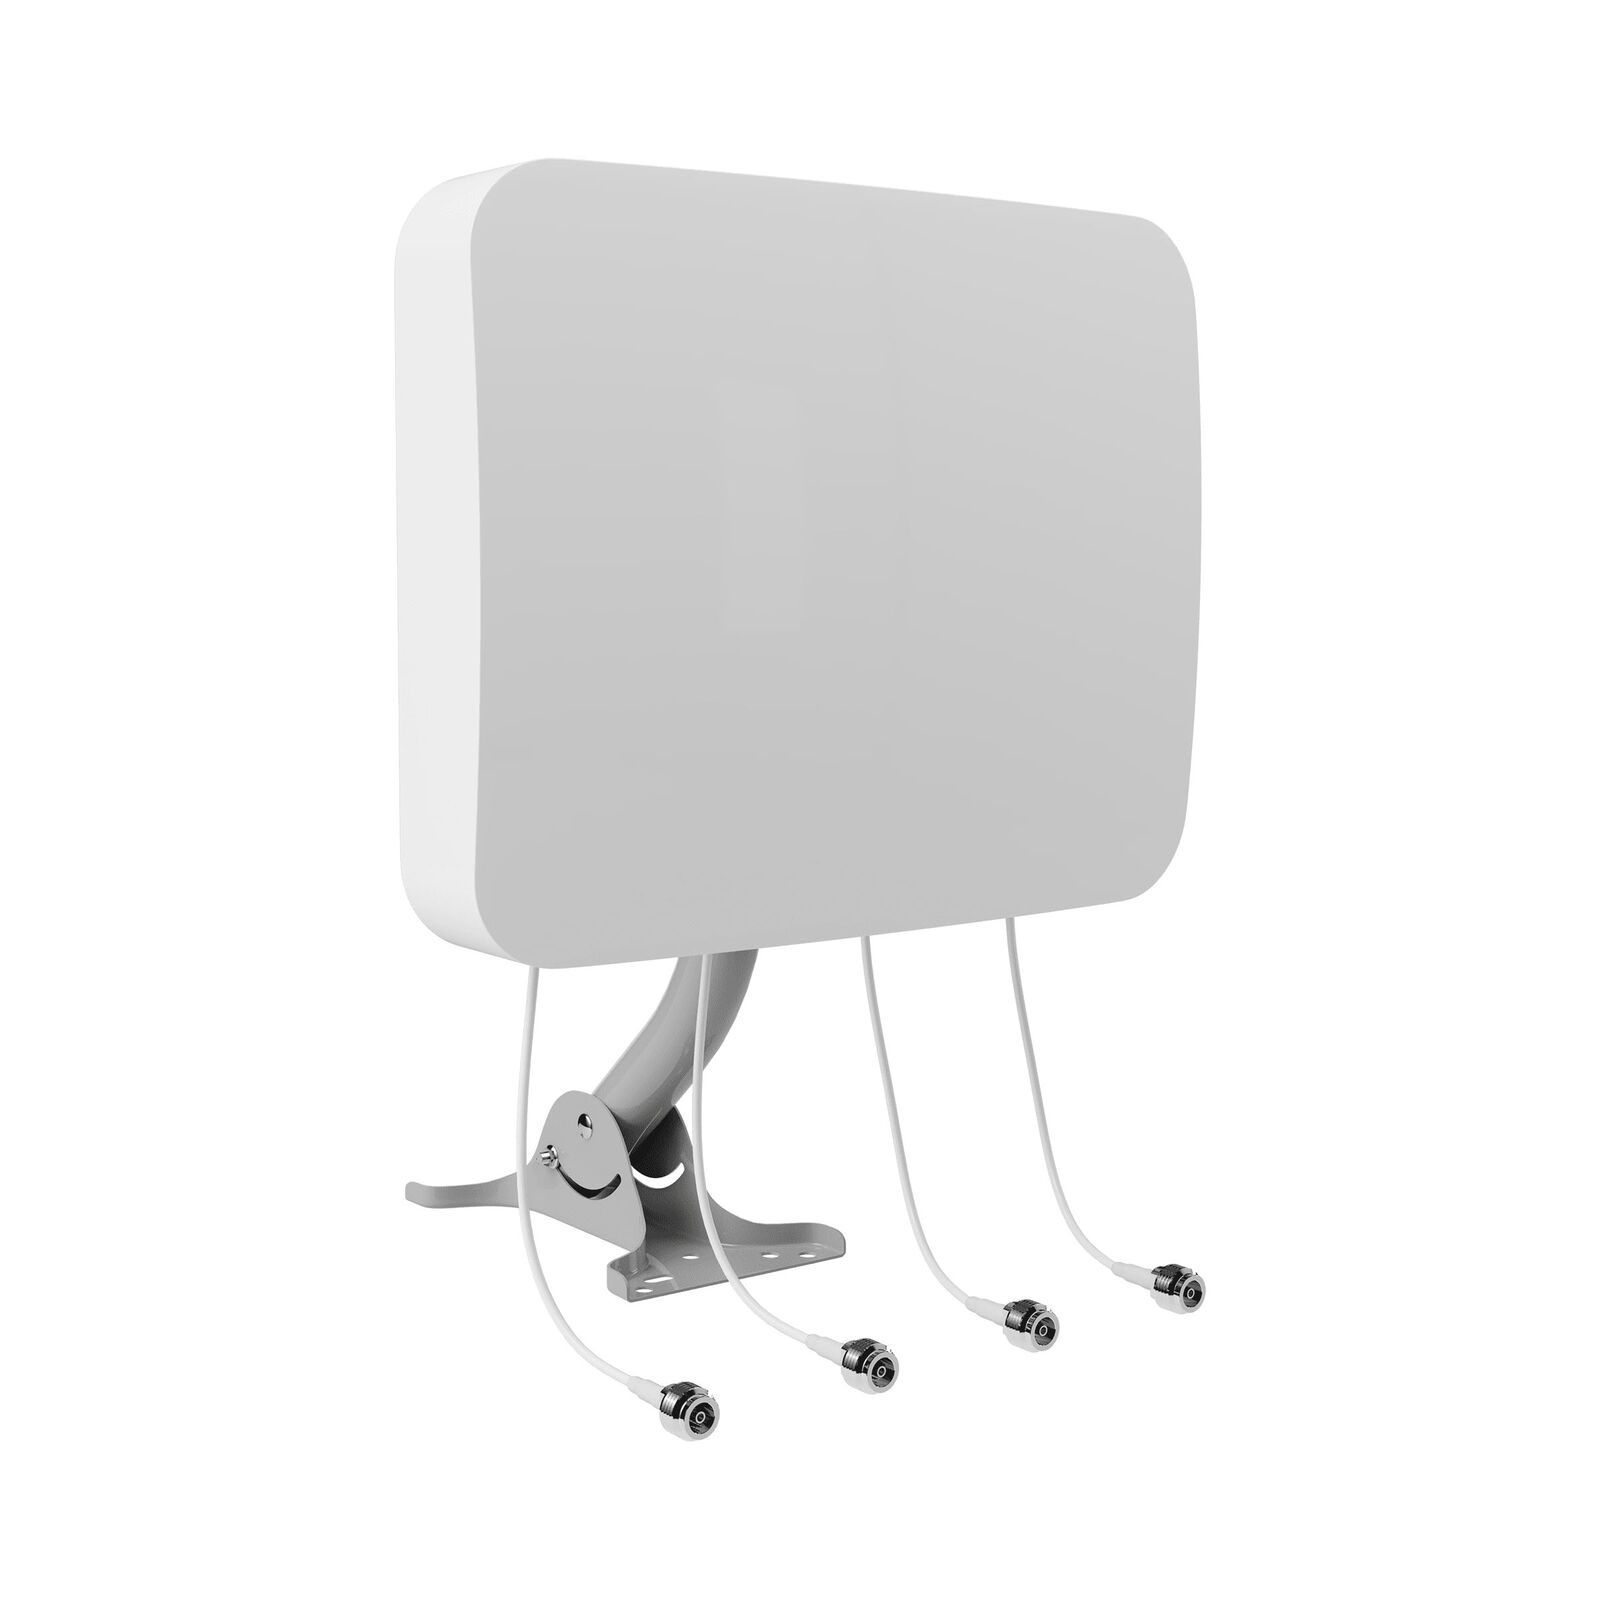 MIMO 4x4 Panel Antenna Kit for 4G & 5G Cellular Hotspots, Routers, & Gateways...